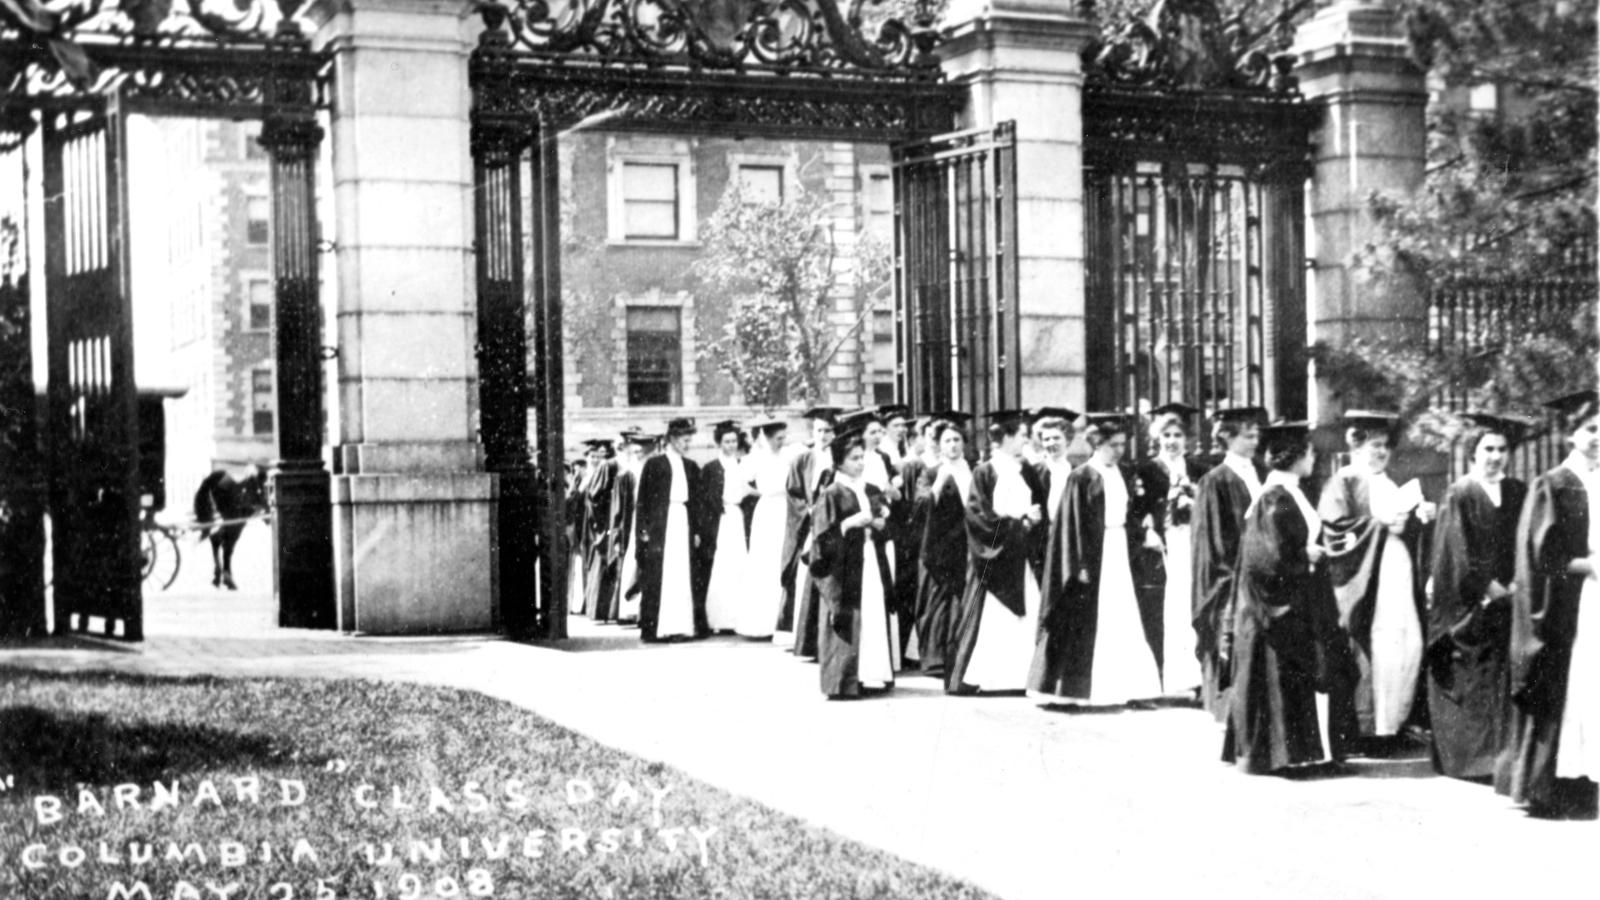 Barnard graduates marching through the College gates in 1908